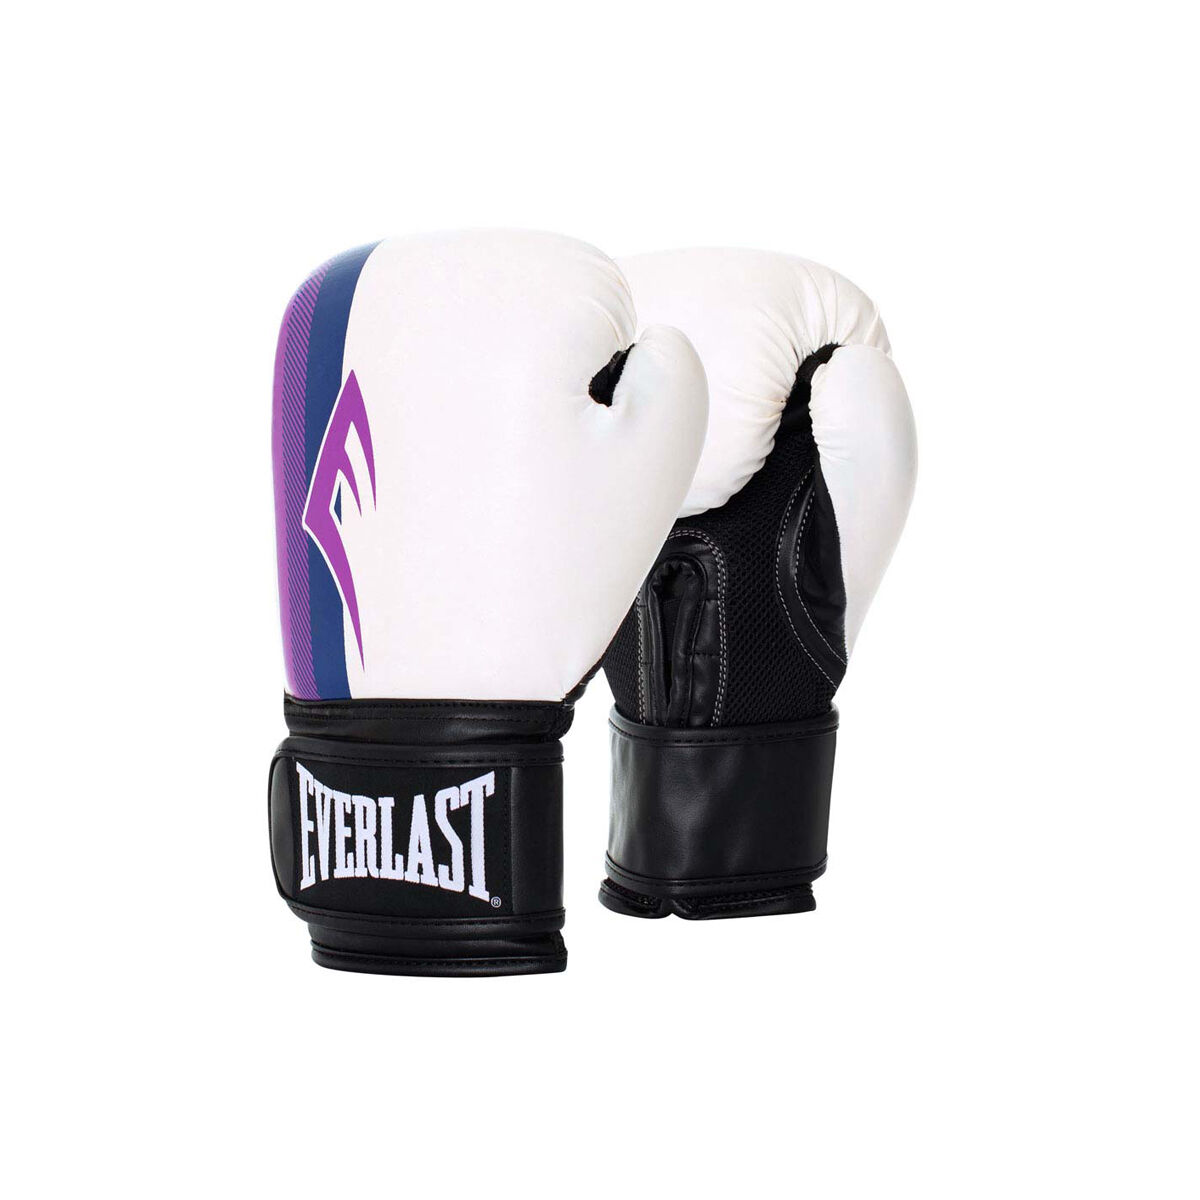 Pro Style Pink Boxing Training Gloves Everlast 12oz Women for sale online 